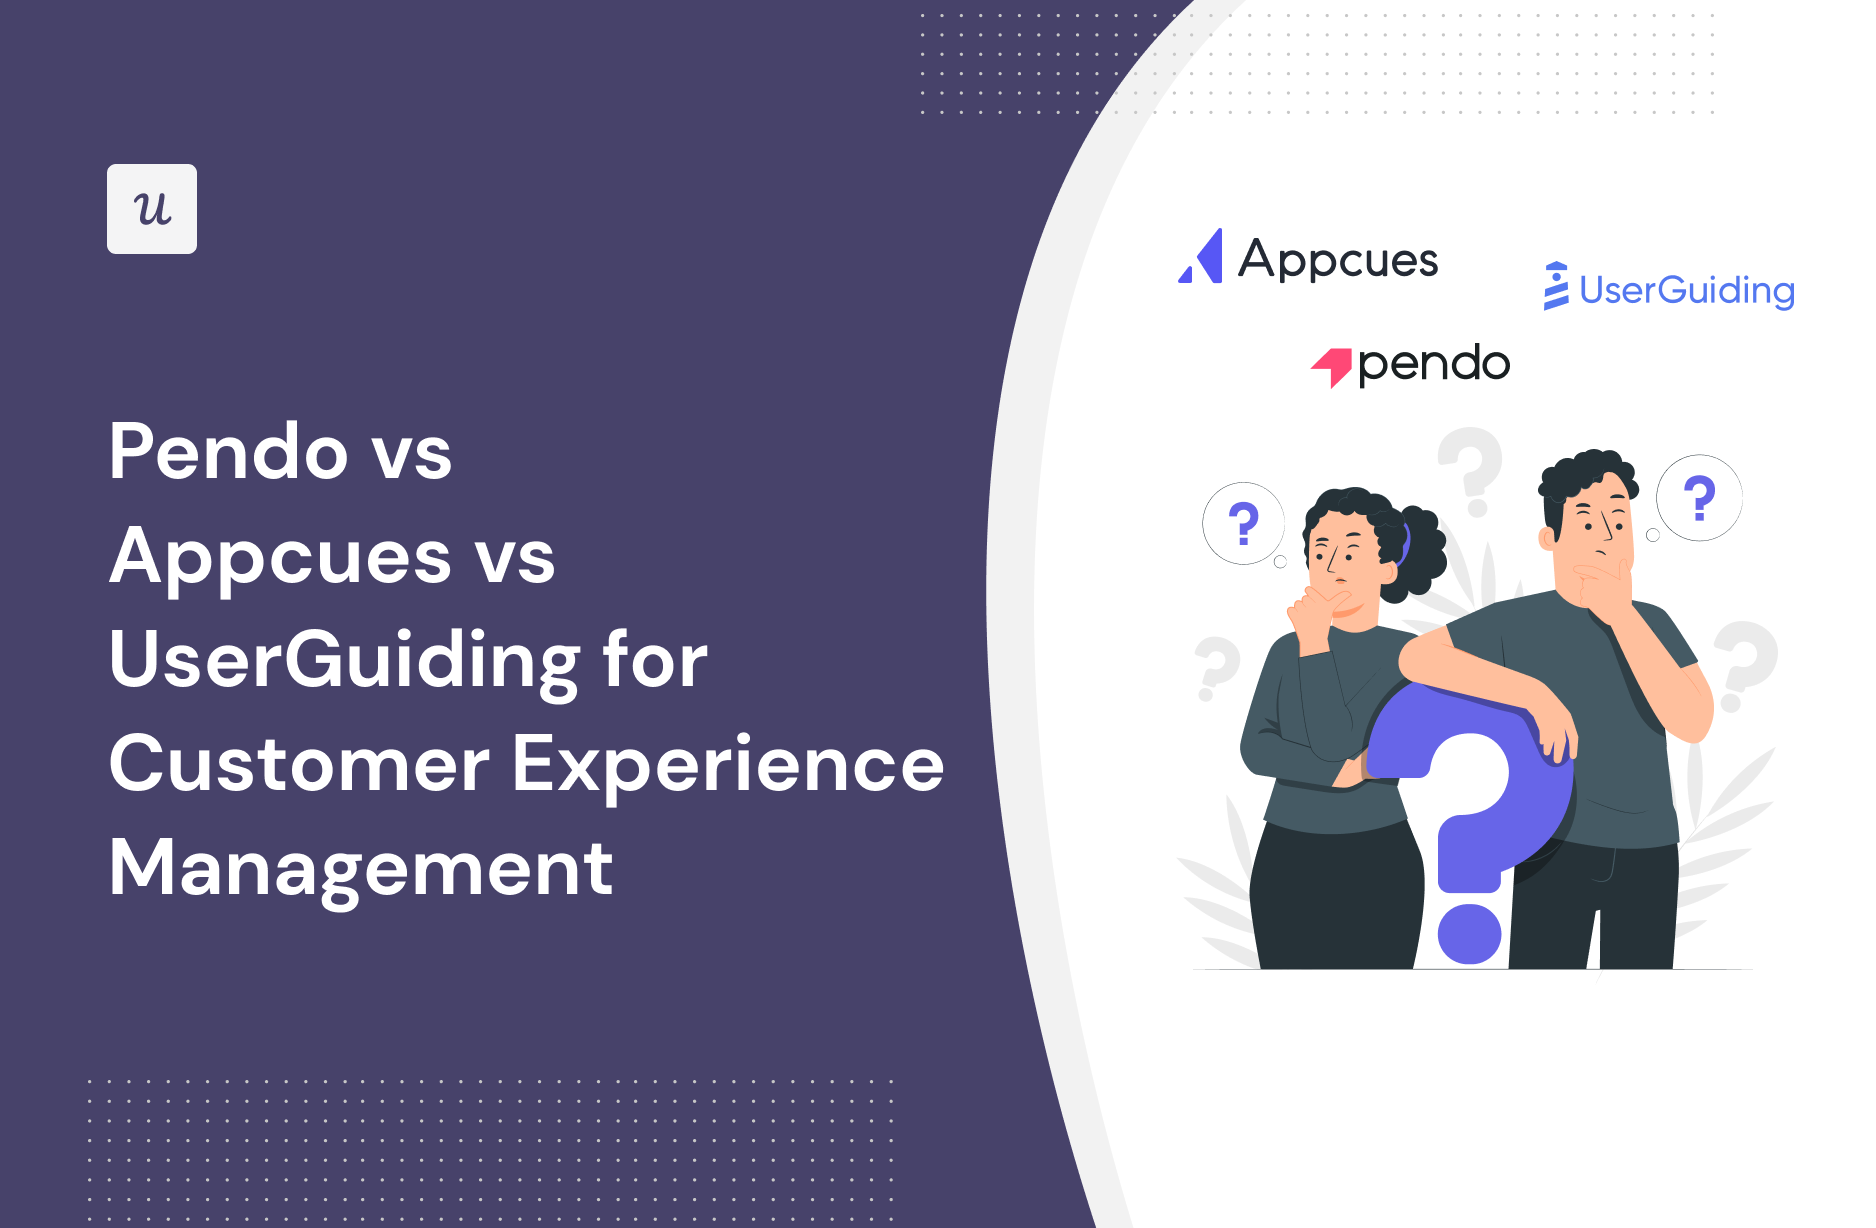 Pendo vs Appcues vs UserGuiding for Customer Experience Management